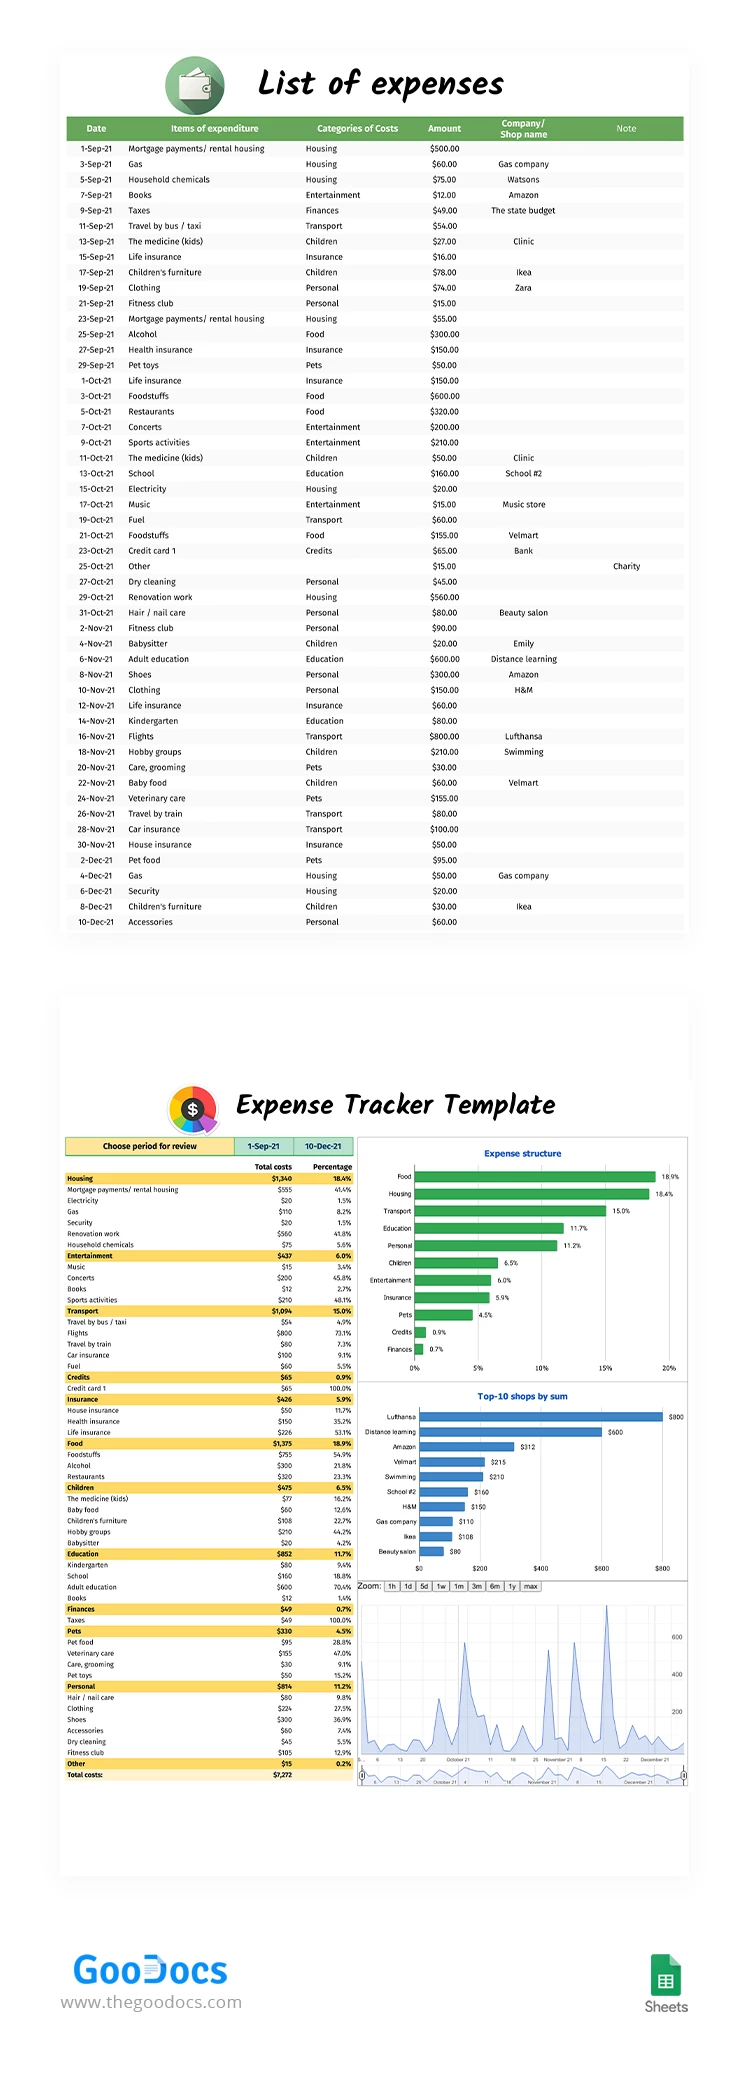 Expense Tracker with Charts - free Google Docs Template - 10063665